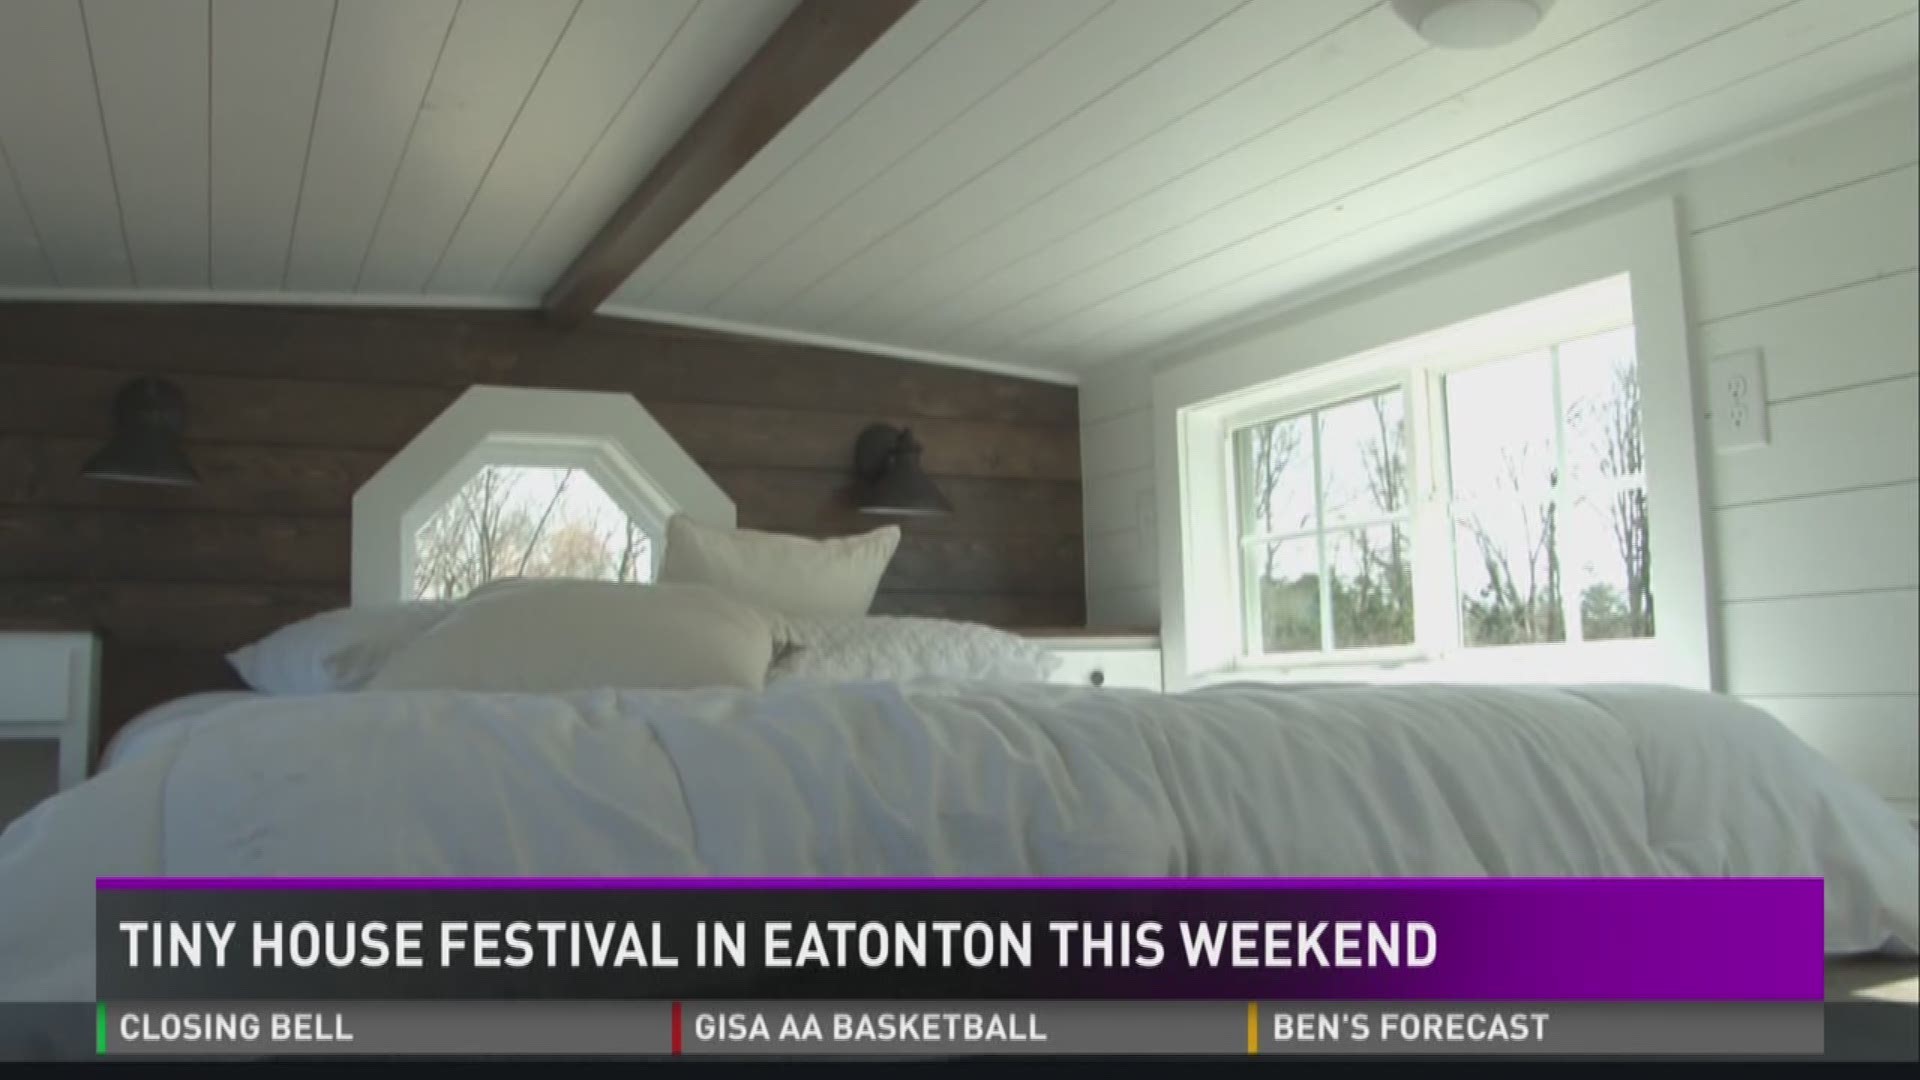 Tiny House Festival in Eatonton this weekend